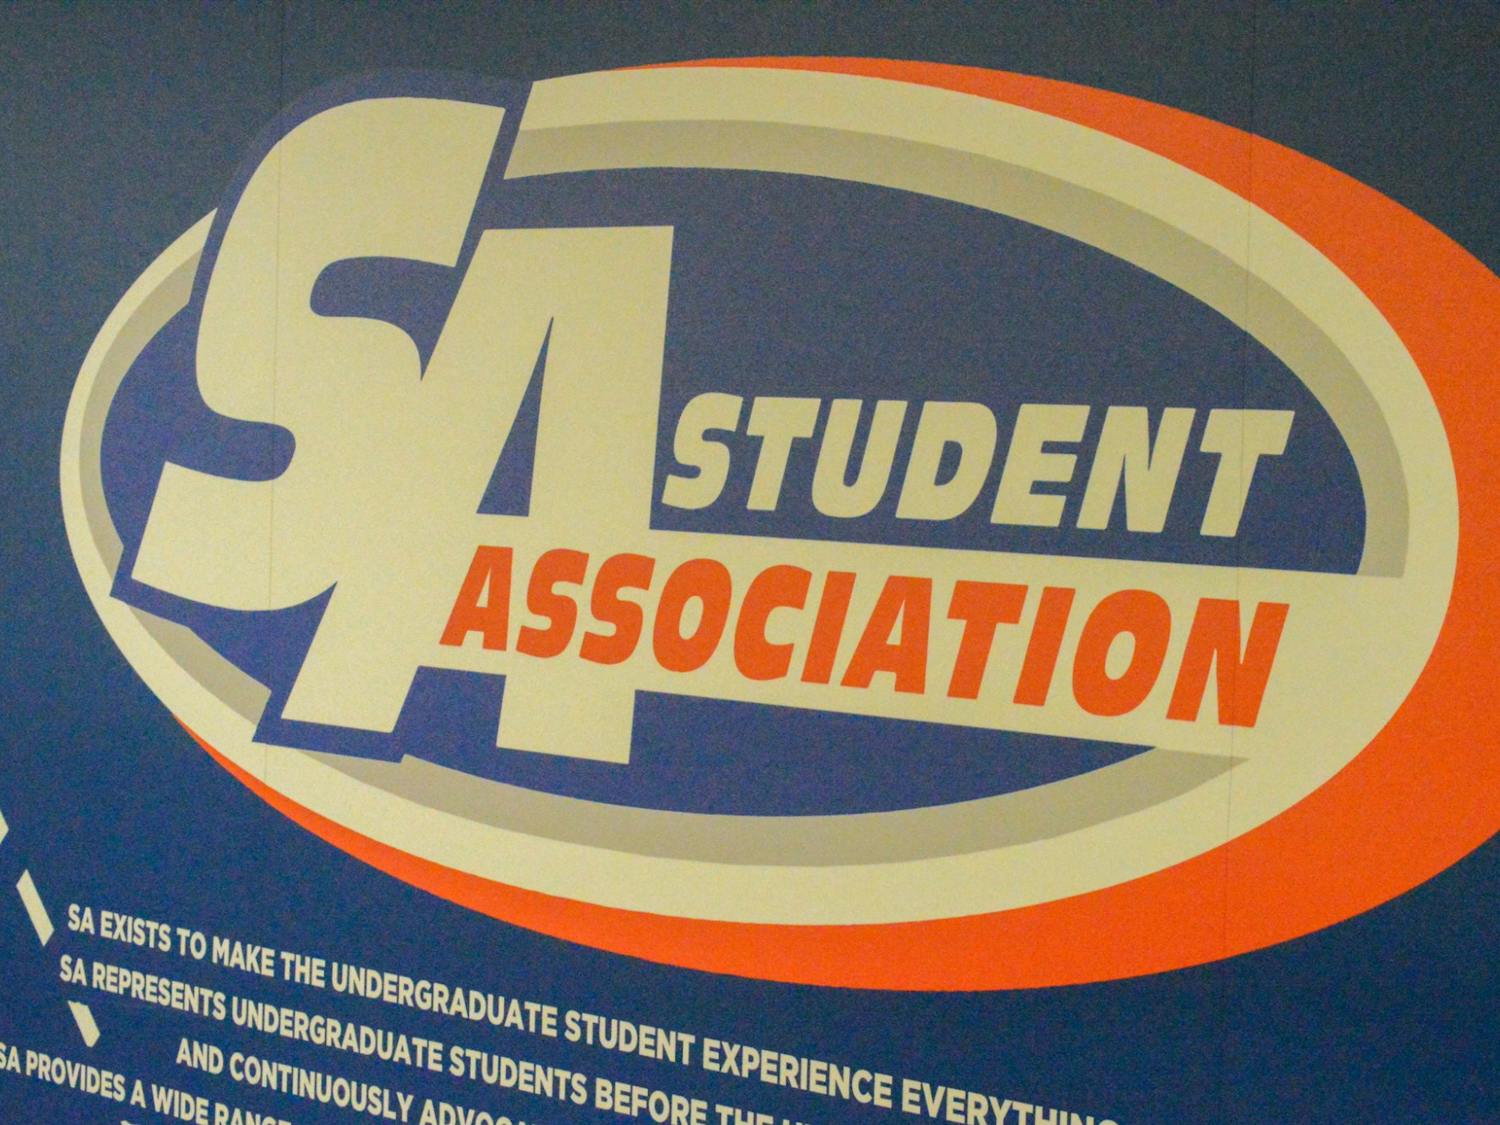 Nine candidates are running for three open Student Association e-board positions for the 2022-23 academic year.